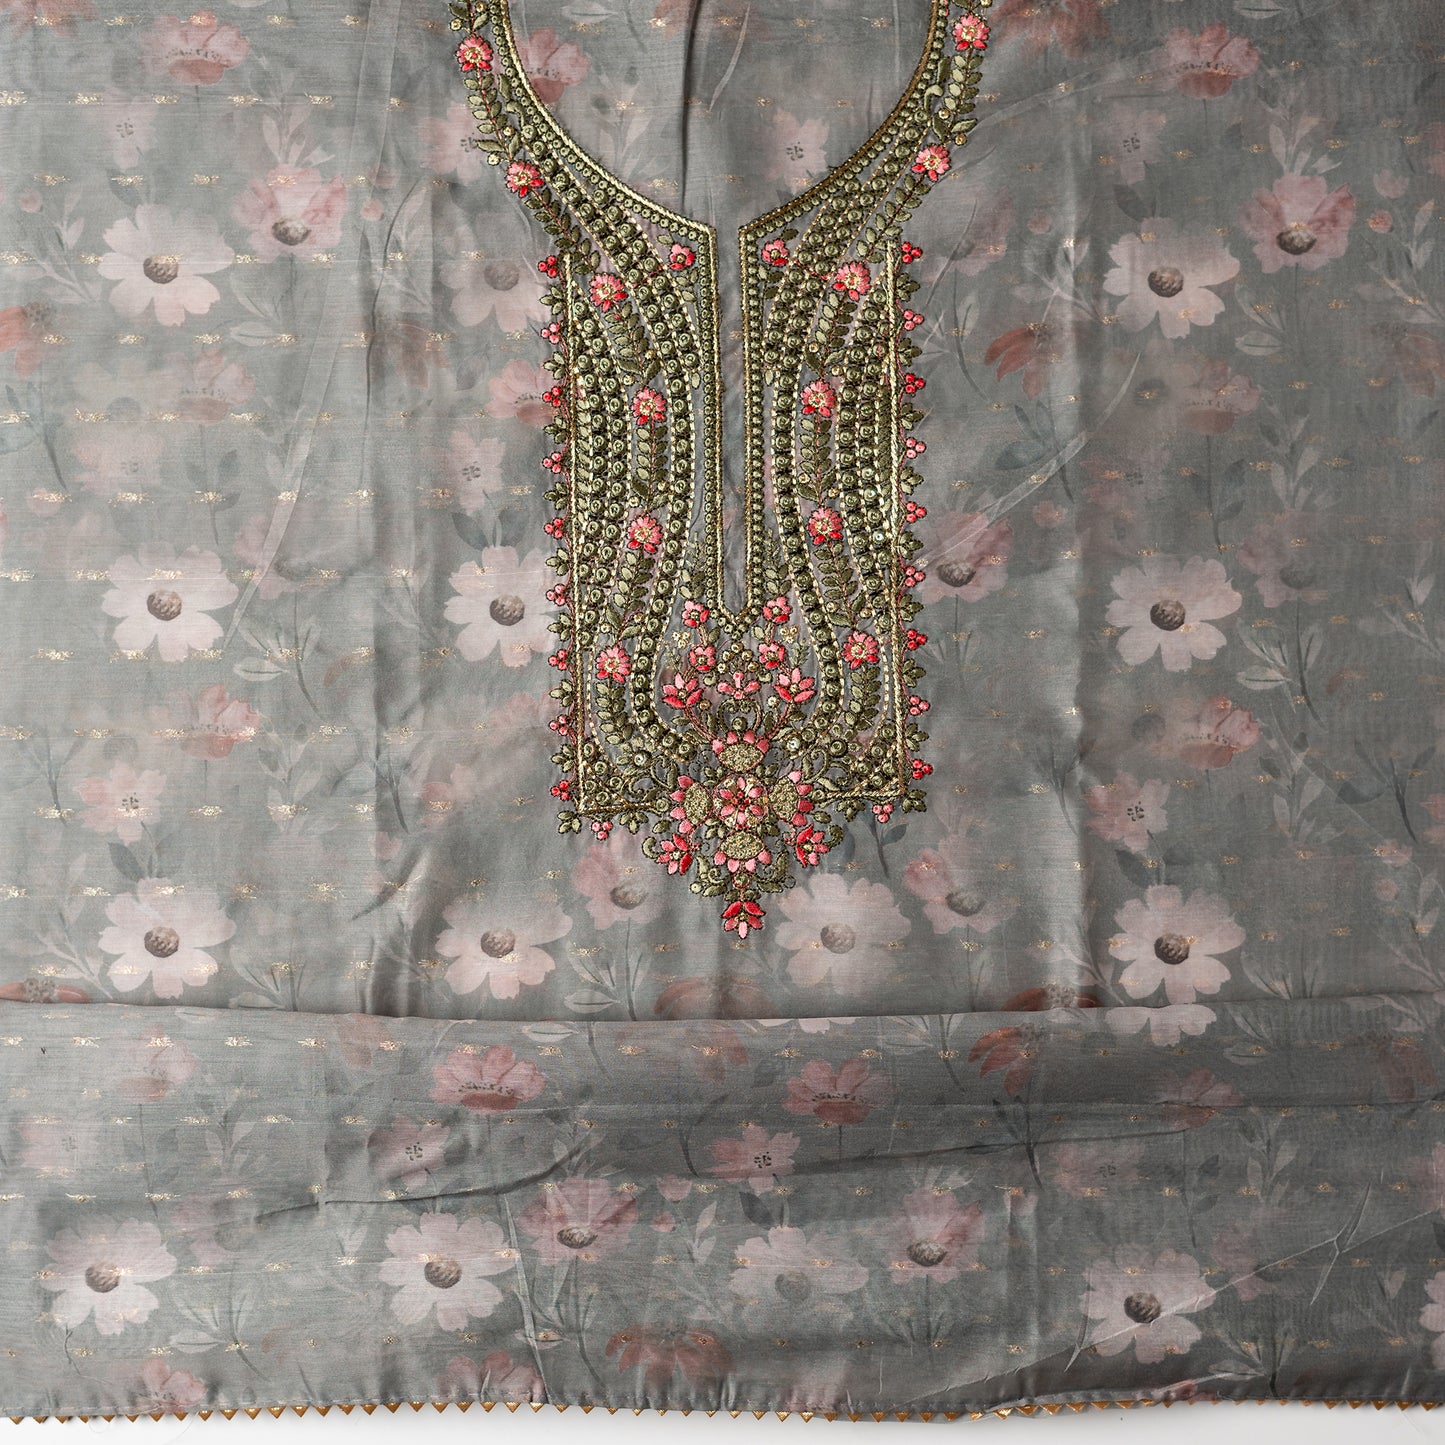 Top fabric, It's just awesome, pick any color of this design and we are sure you will love it the most. Beautiful embroidery work  in the neck. Sober floral prints and jacquard weaving in golden thread is giving the set a royal look.